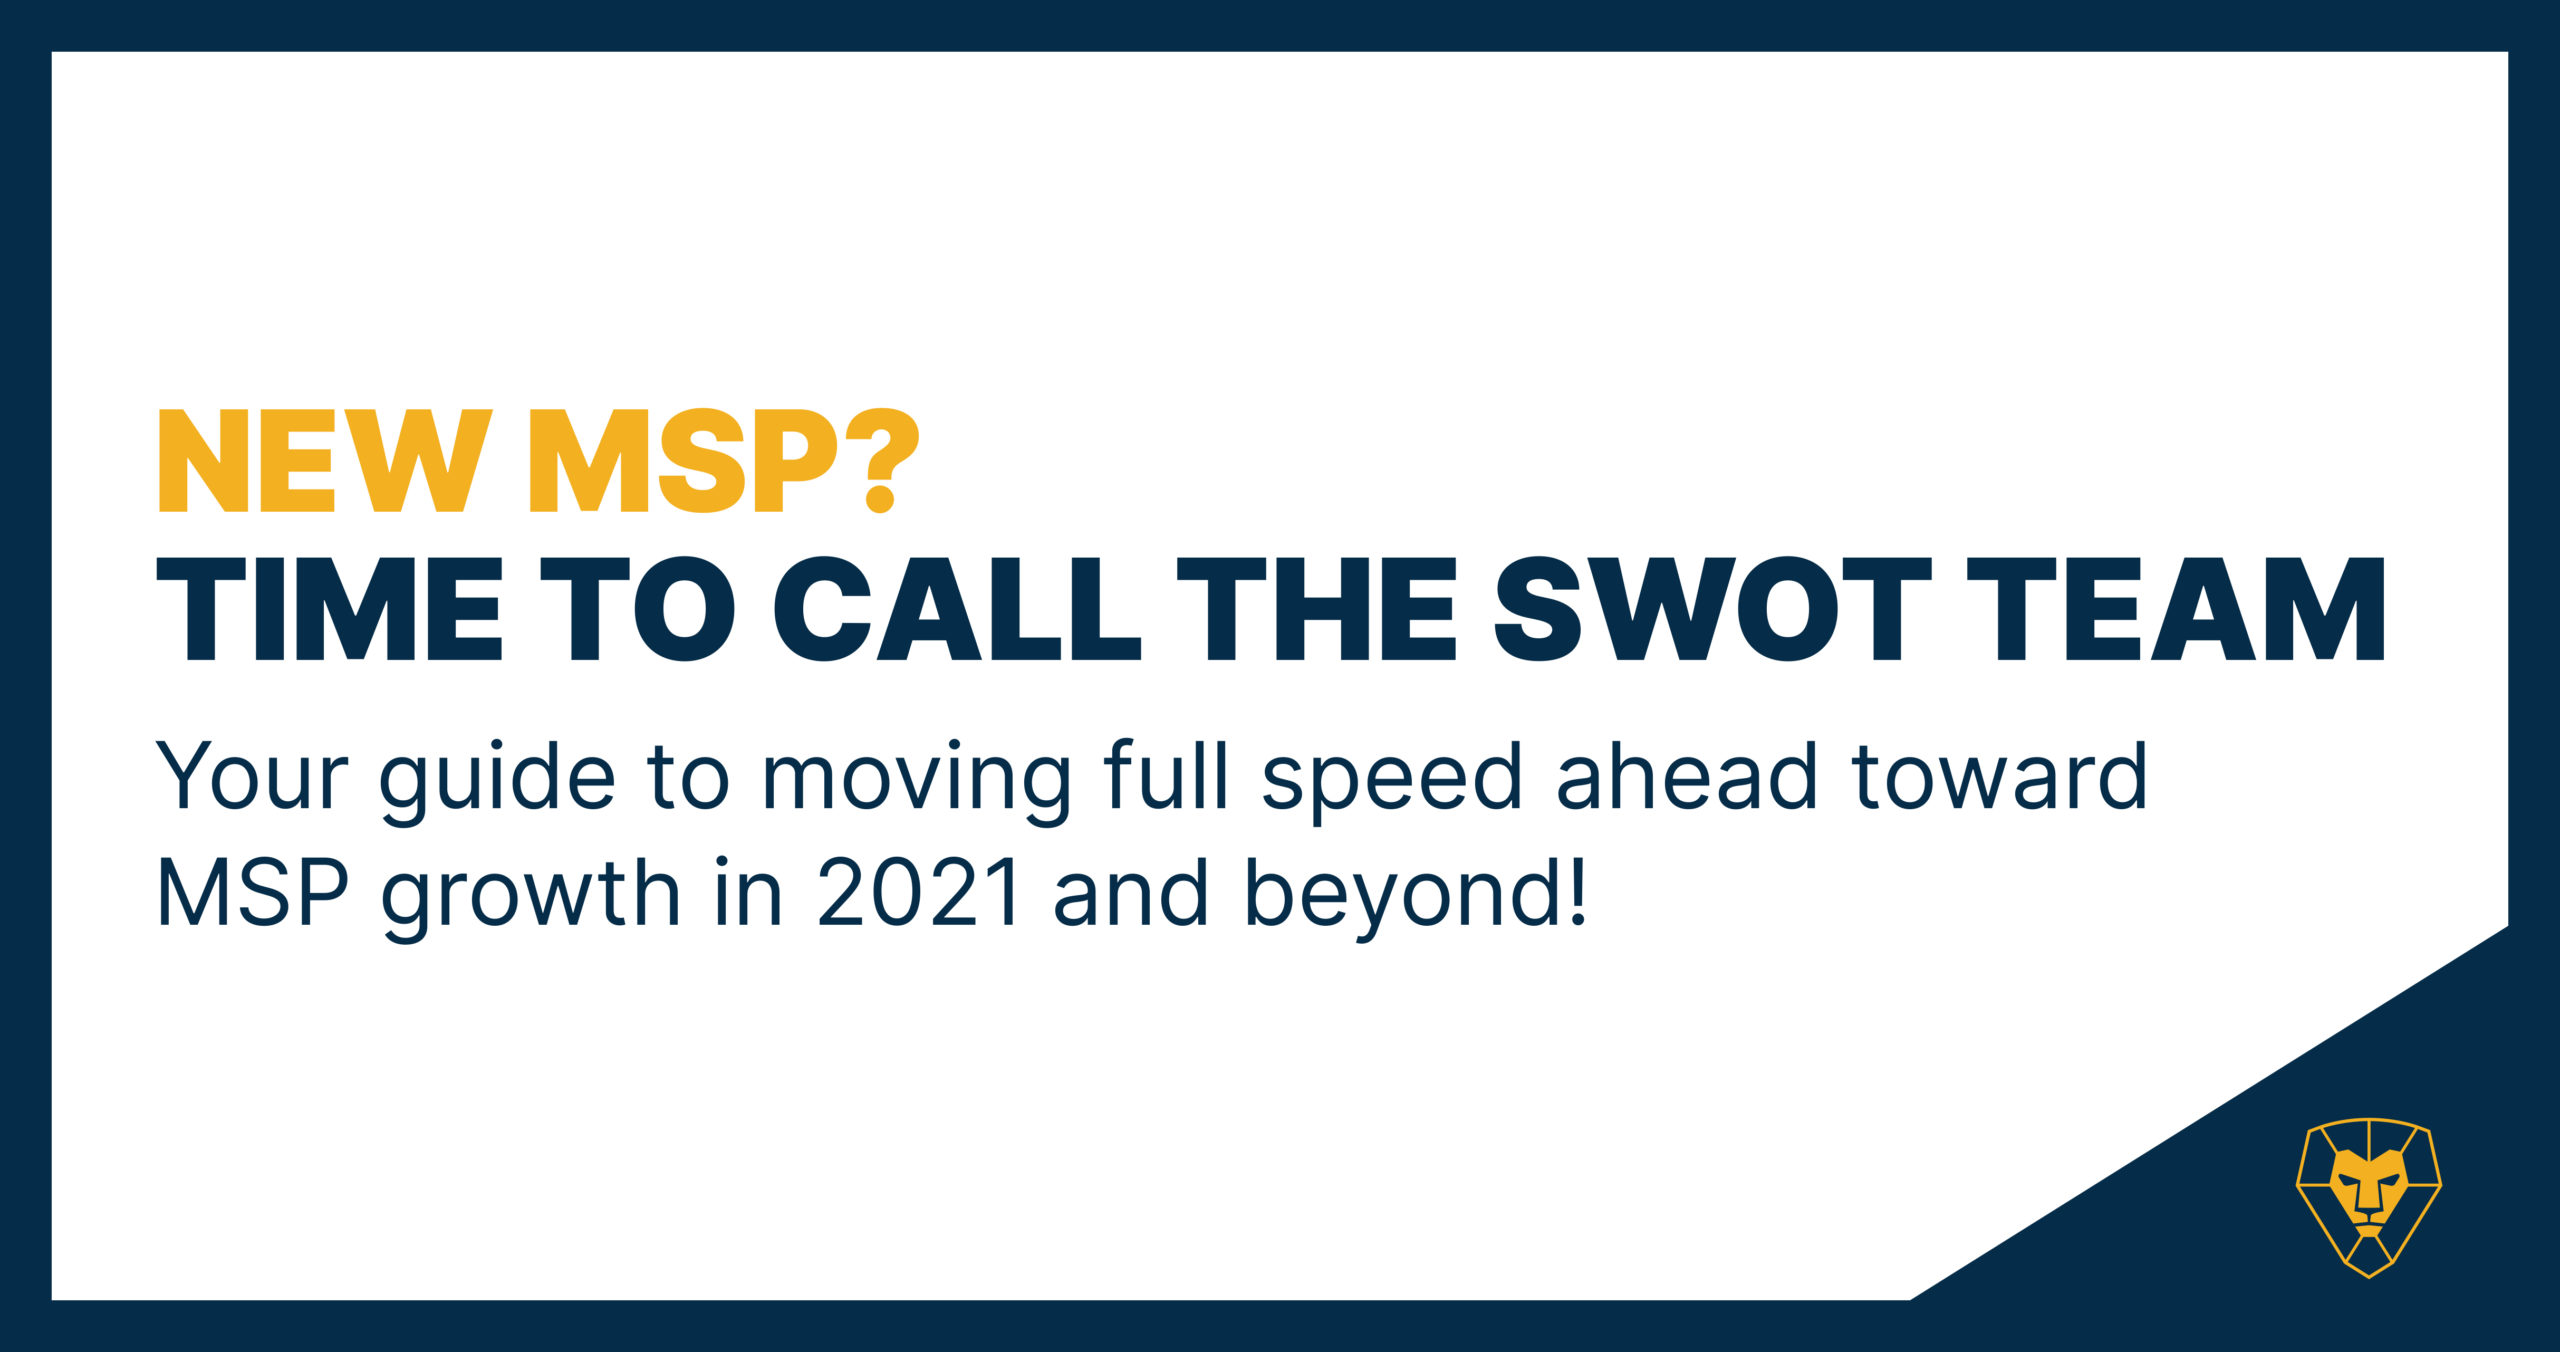 New MSP? Time to call the SWOT Team for MSP growth in 2021